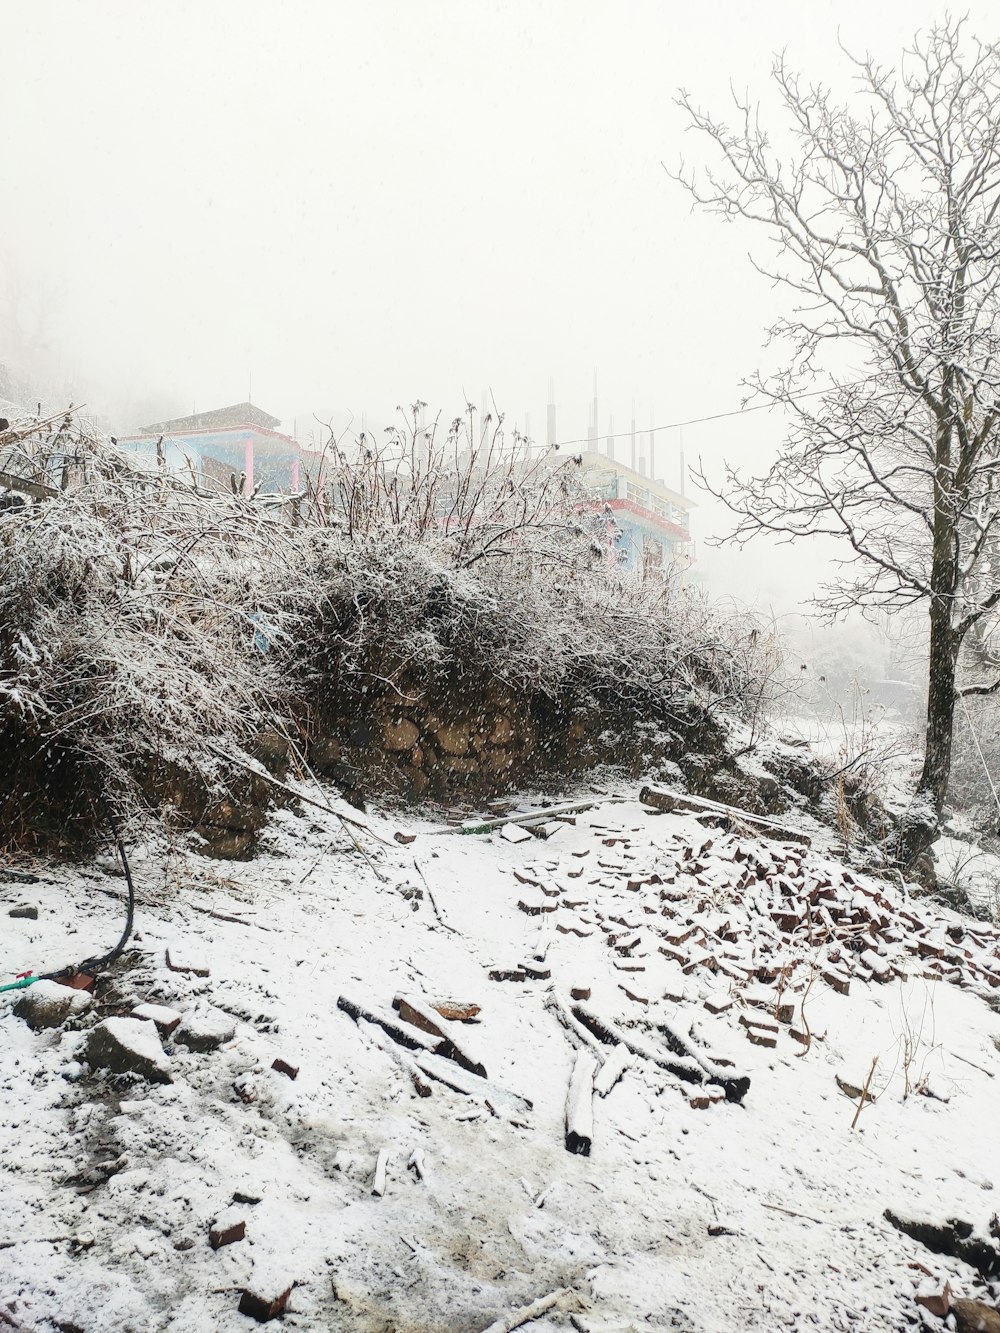 a snow covered hillside with trees and a building in the background